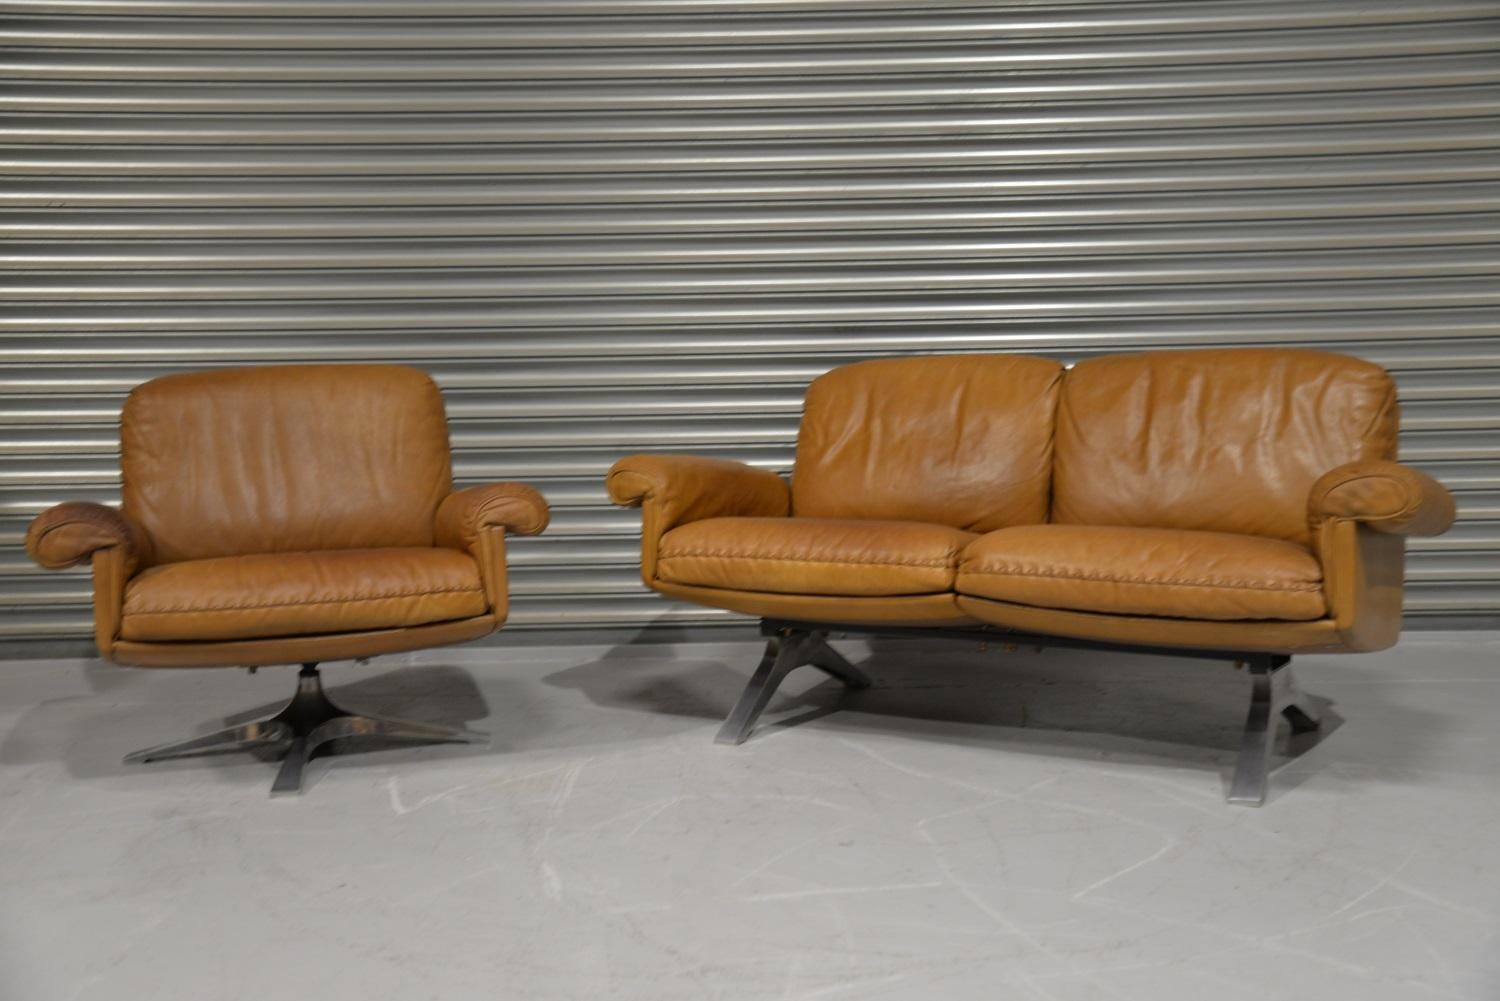 Discounted airfreight for our US Continent and International customers (from 2 weeks door to door)

We are delighted to bring to you a vintage De Sede DS 31 two-seat sofa and loveseat with matching swivel lounge club armchair. Built in the 1970s